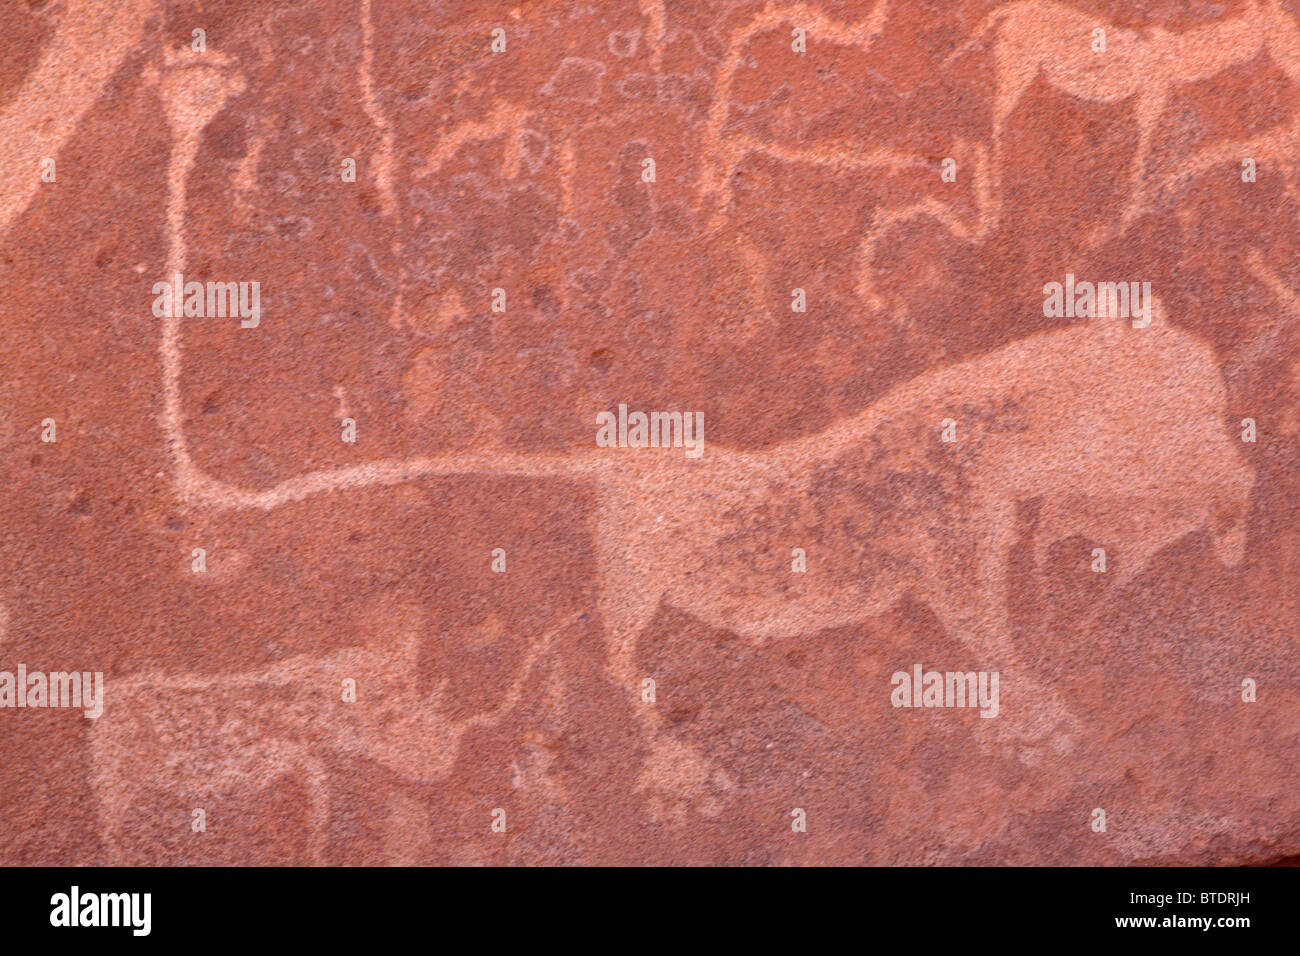 Close up of San rock art etchings of a lion, rhino and other animals Stock Photo